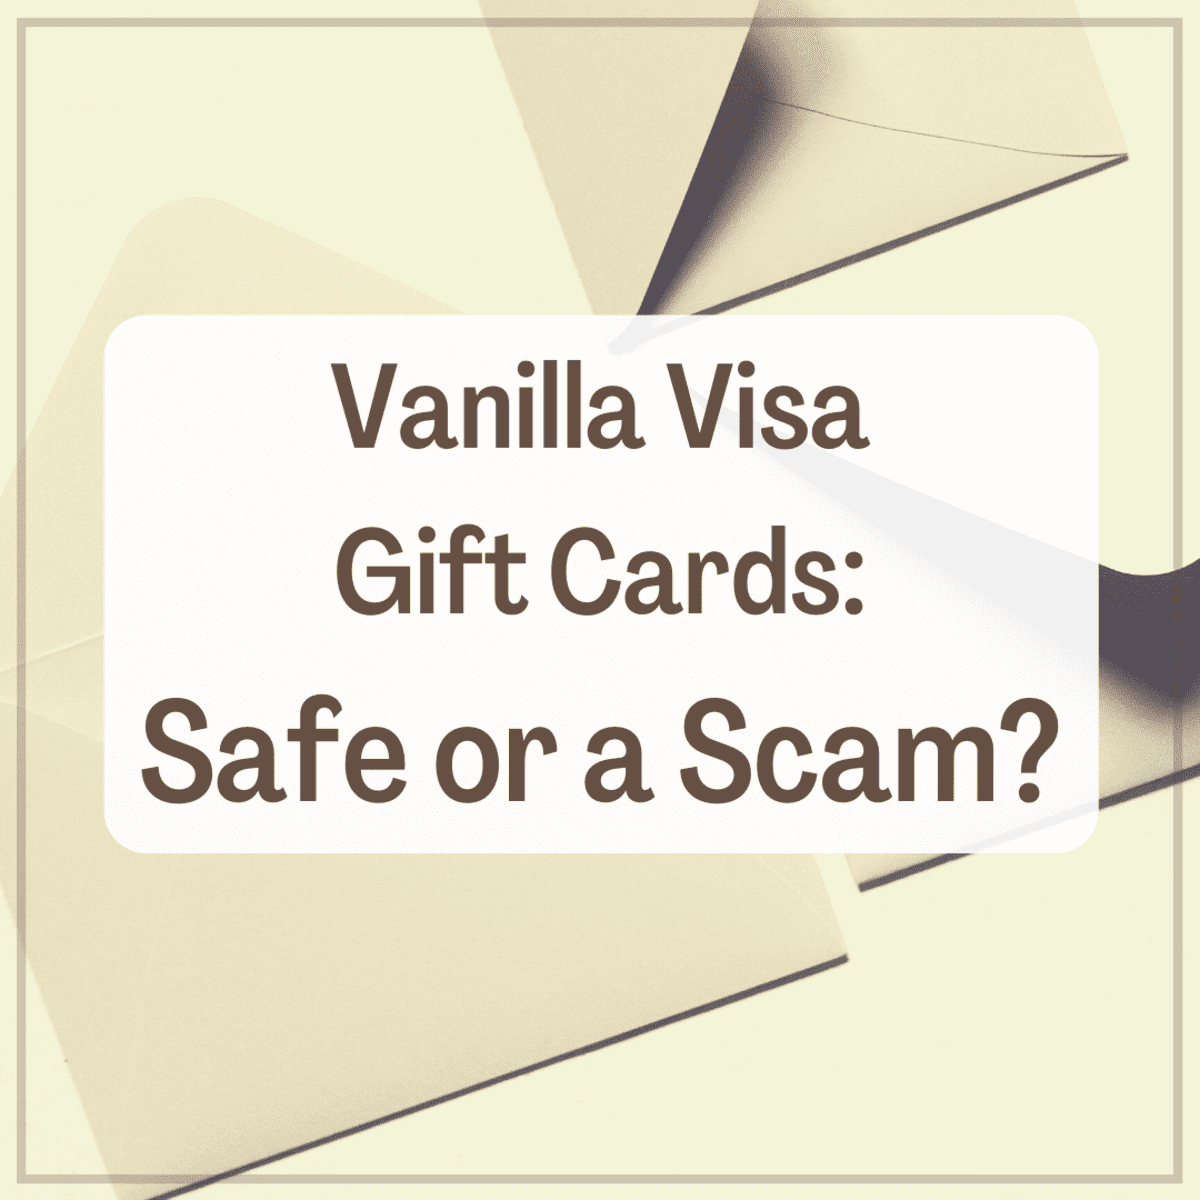 How to check your Vanilla Visa balance in Canada?